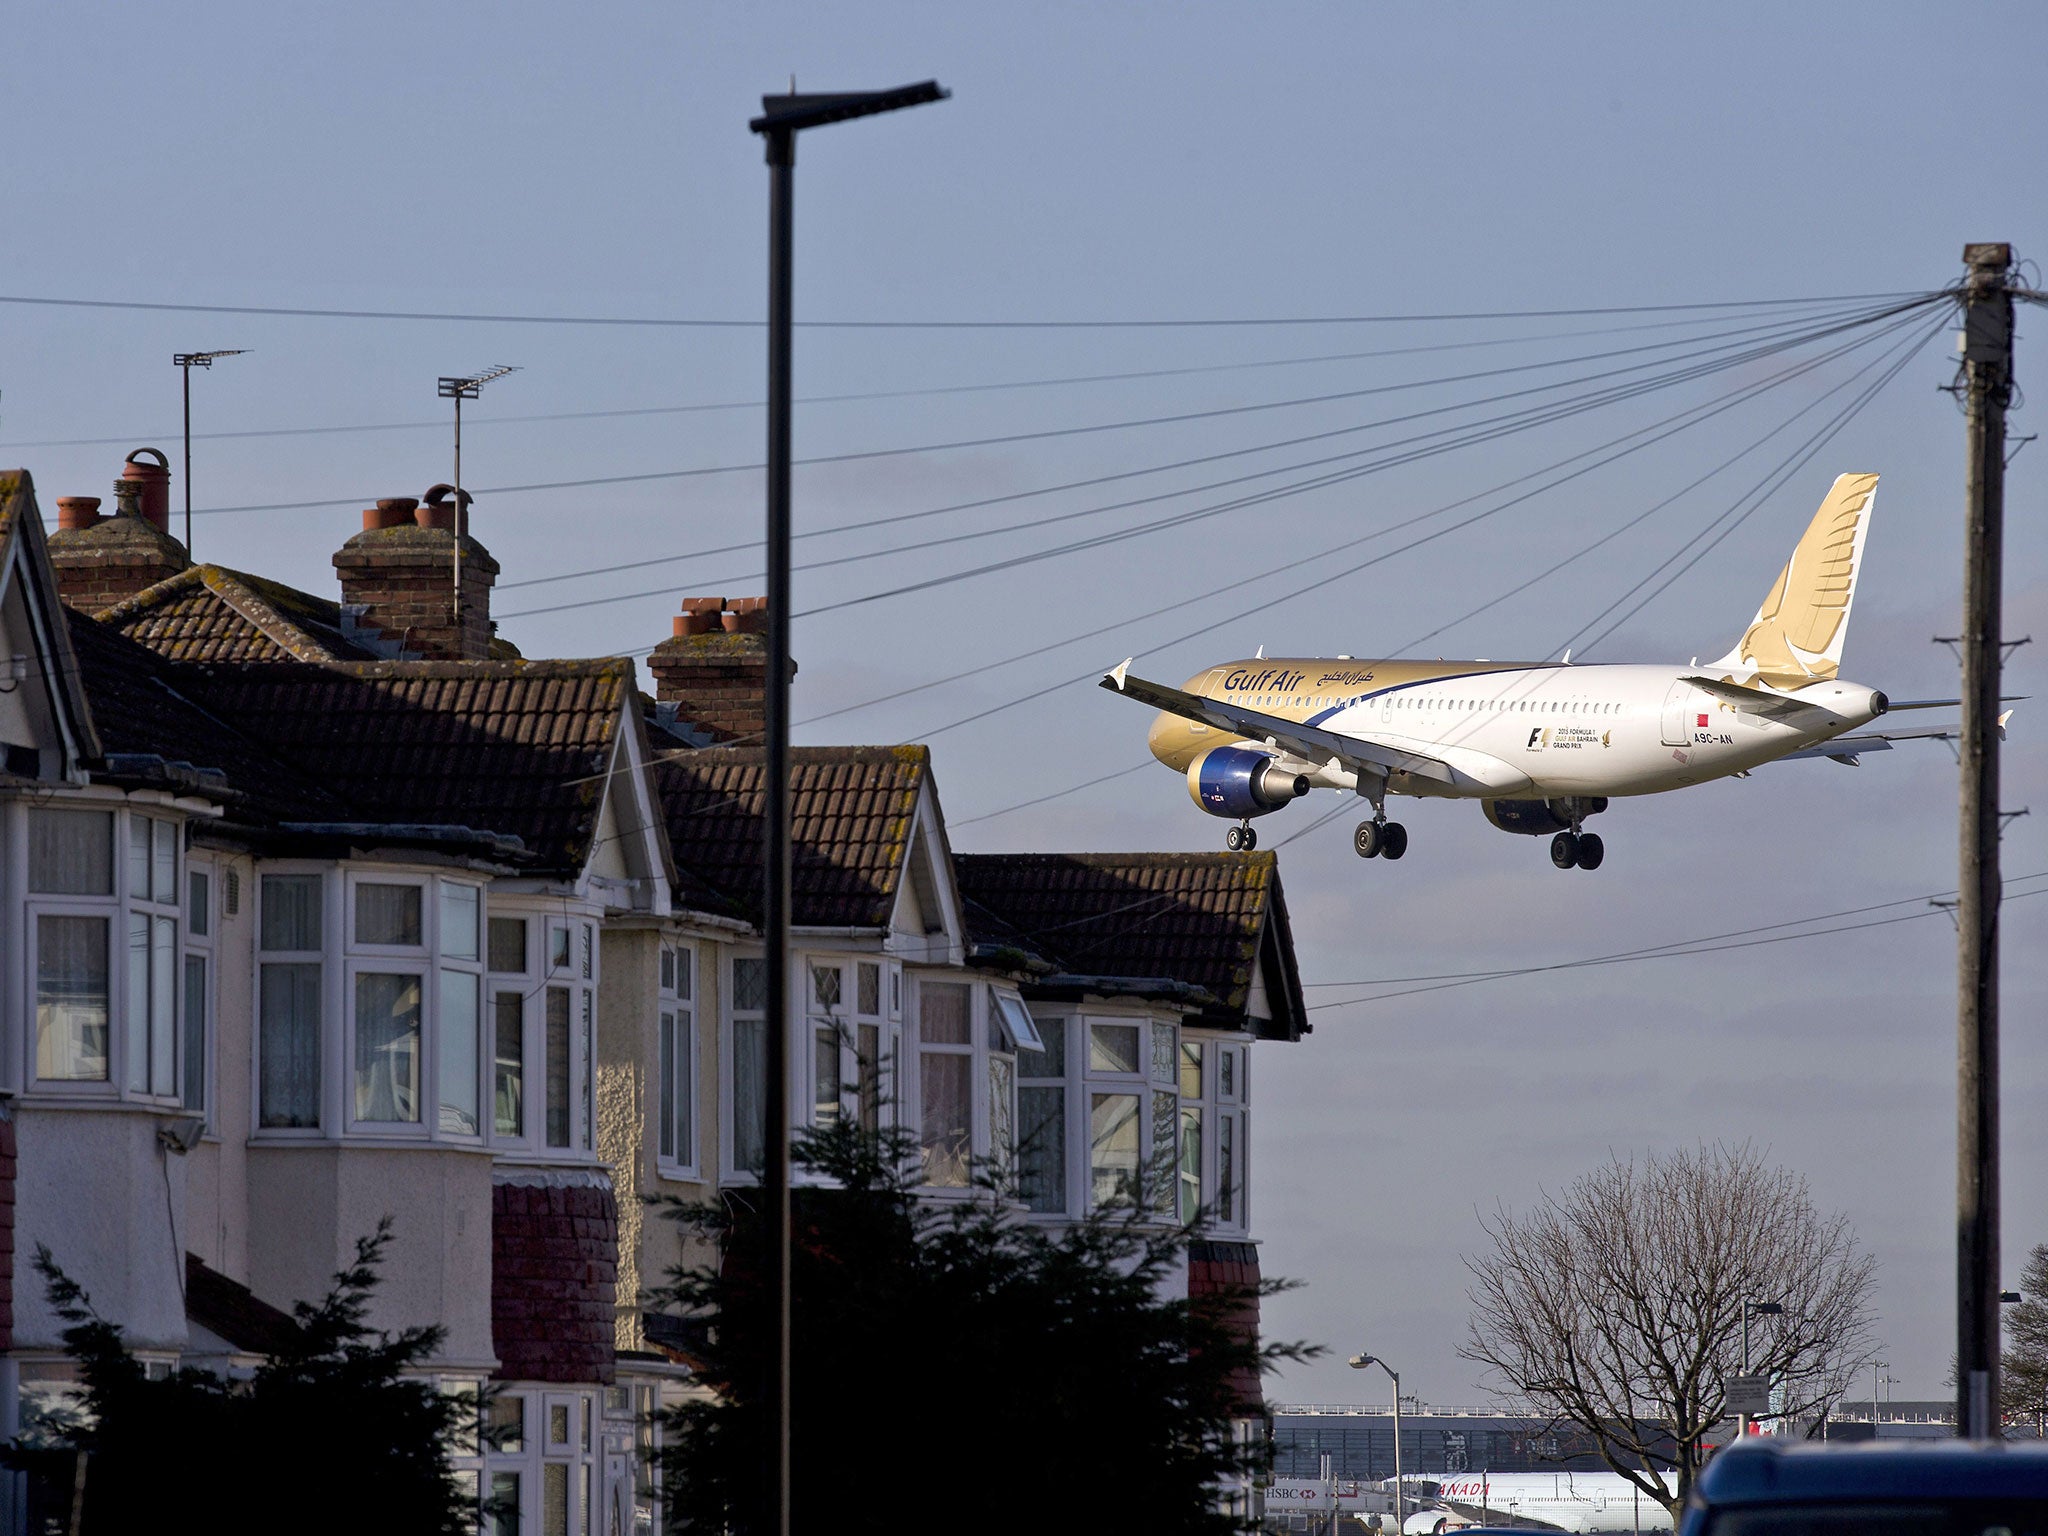 A report has recommended building a new runway at heathrow